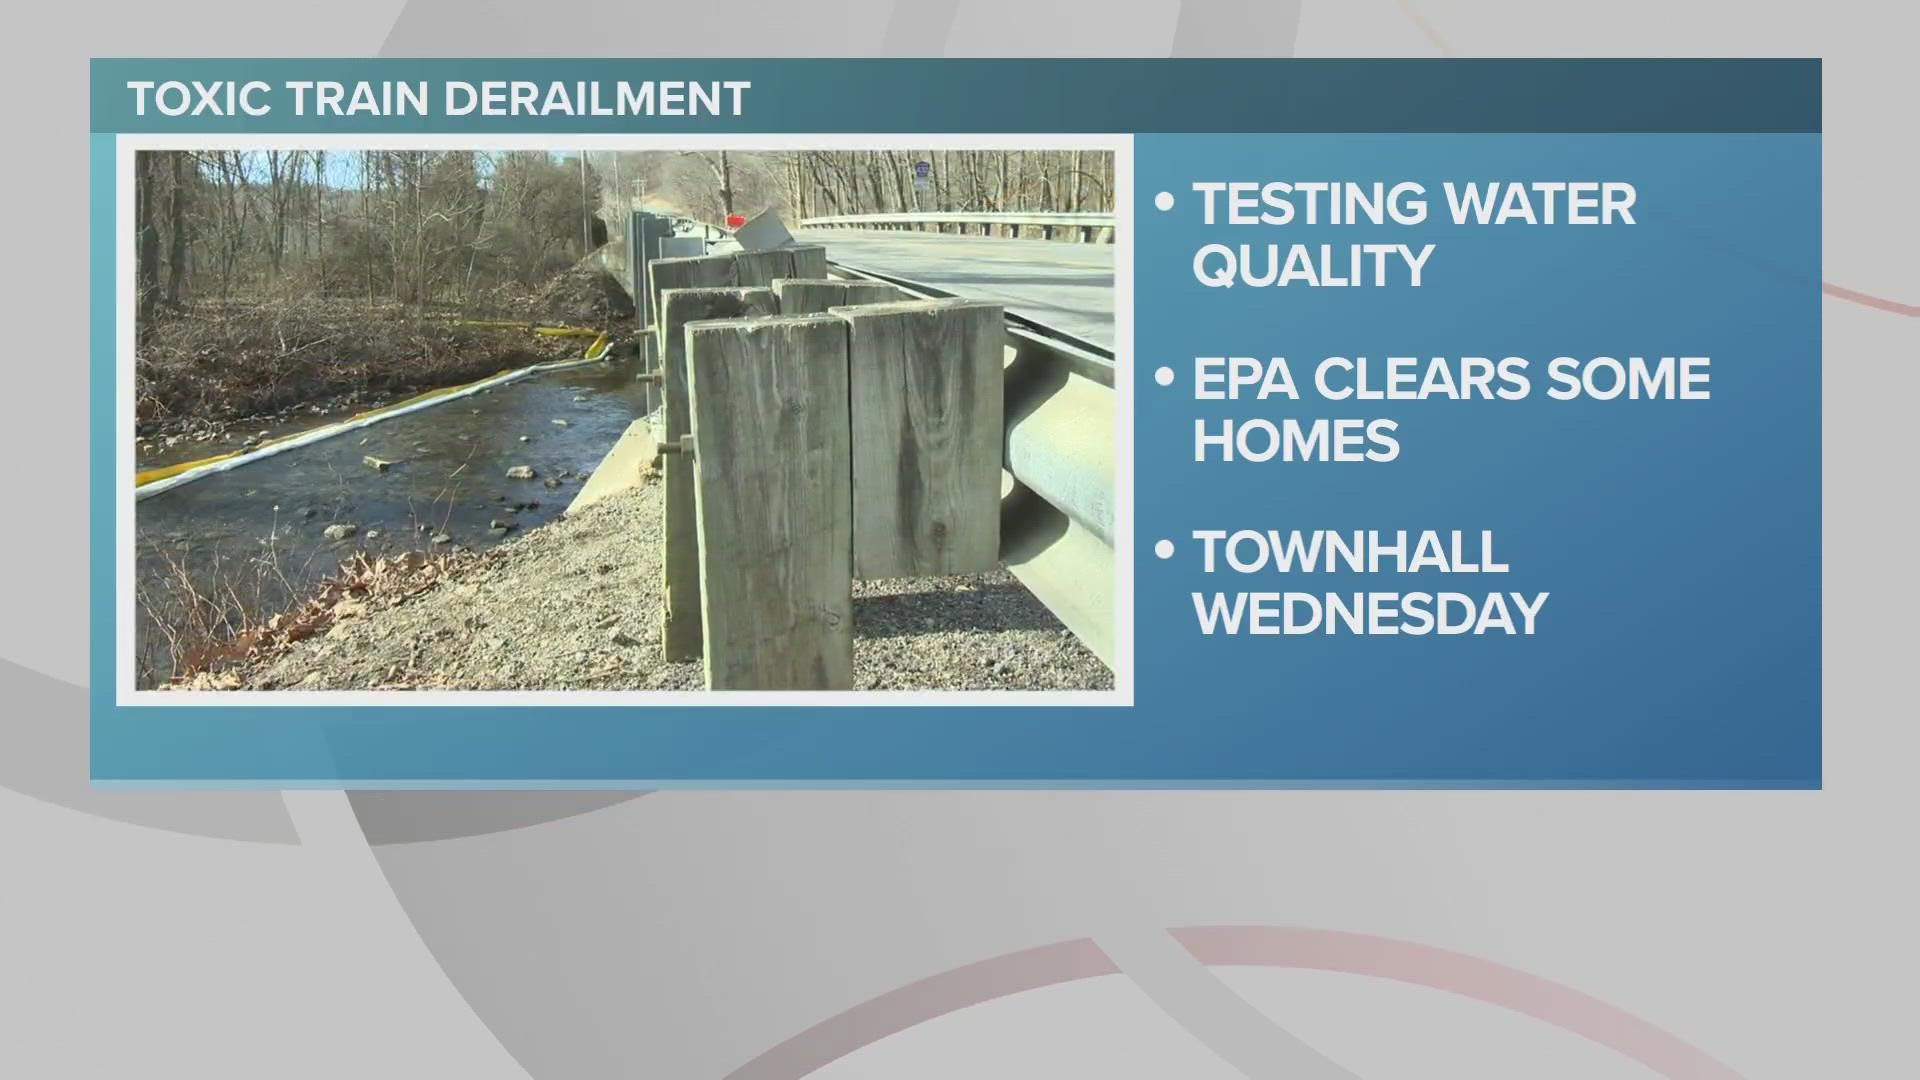 WV American Water said that it's also going to install a secondary intake on the Guyandotte River in case there's a need to switch to an alternate water source.